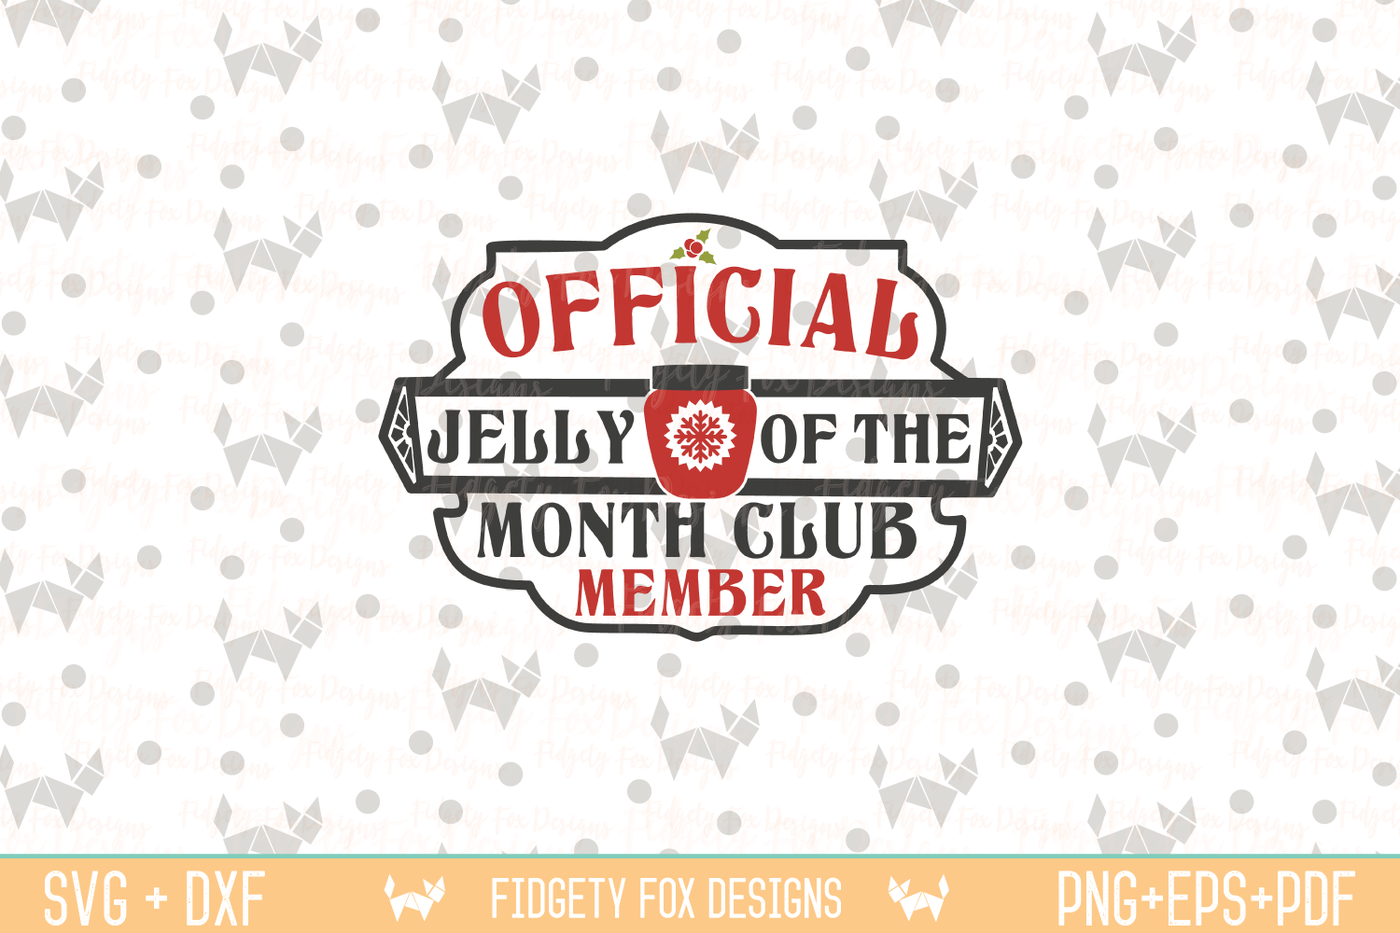 Download Jelly Of The Month Svg Dxf Eps Png Files For Cutting Machines By Fidgety Fox Designs Thehungryjpeg Com